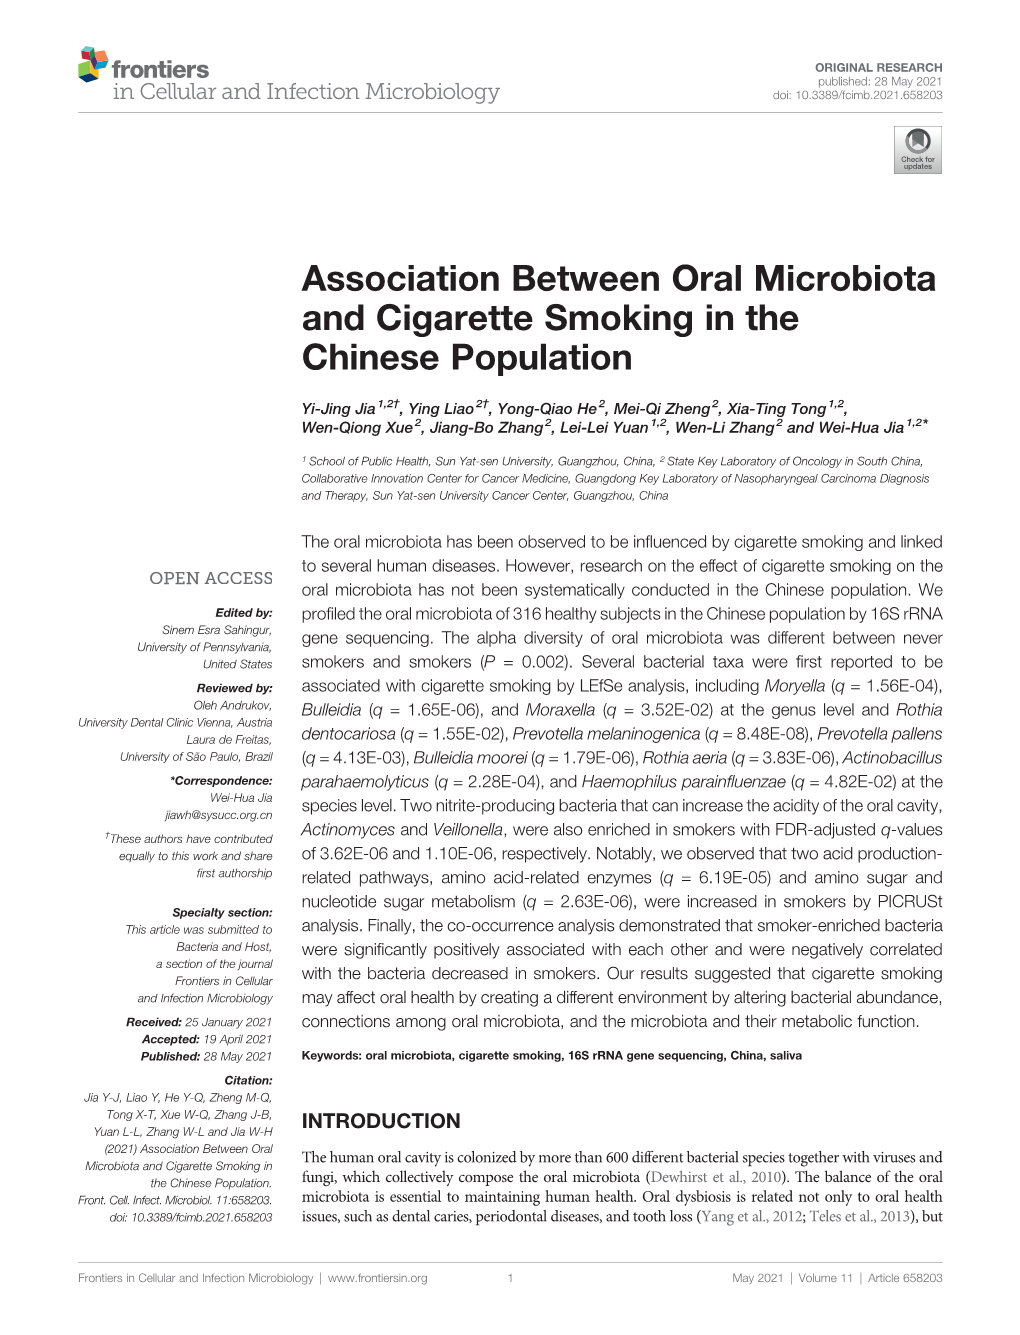 Association Between Oral Microbiota and Cigarette Smoking in the Chinese Population